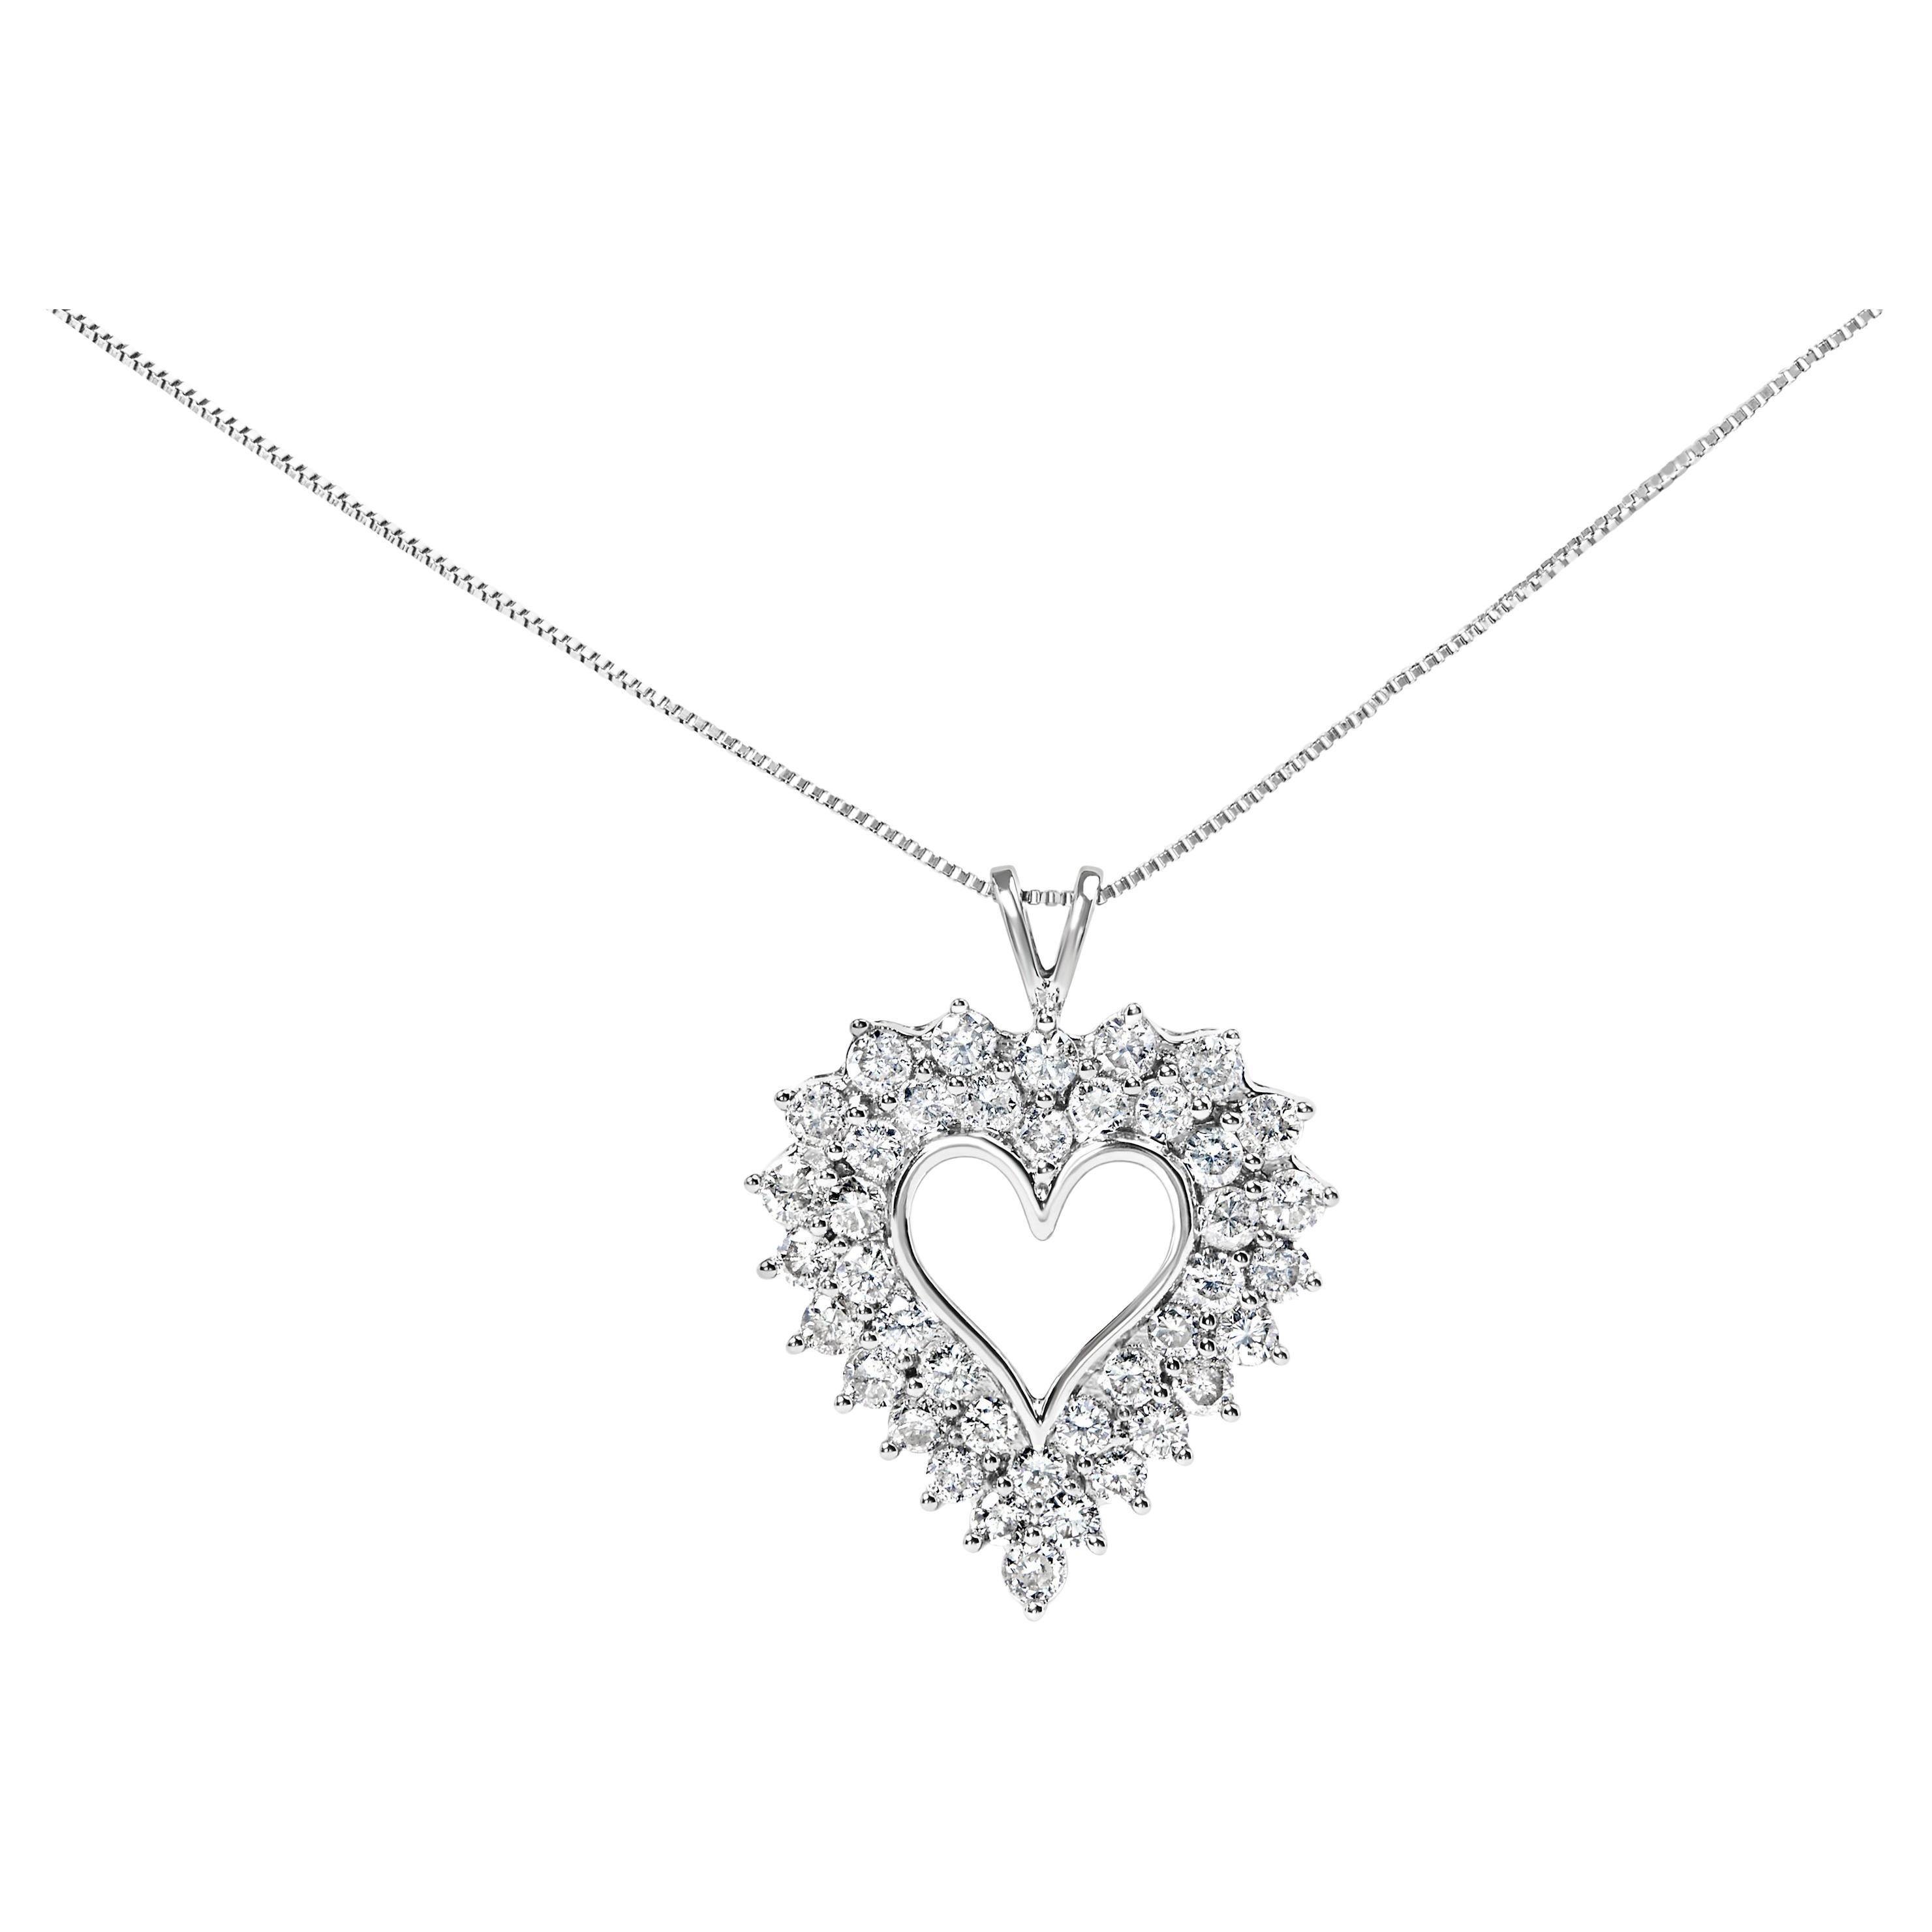 .925 Sterling Silver 4.0 Carat Diamond Two Row Open Heart Pendant Necklace